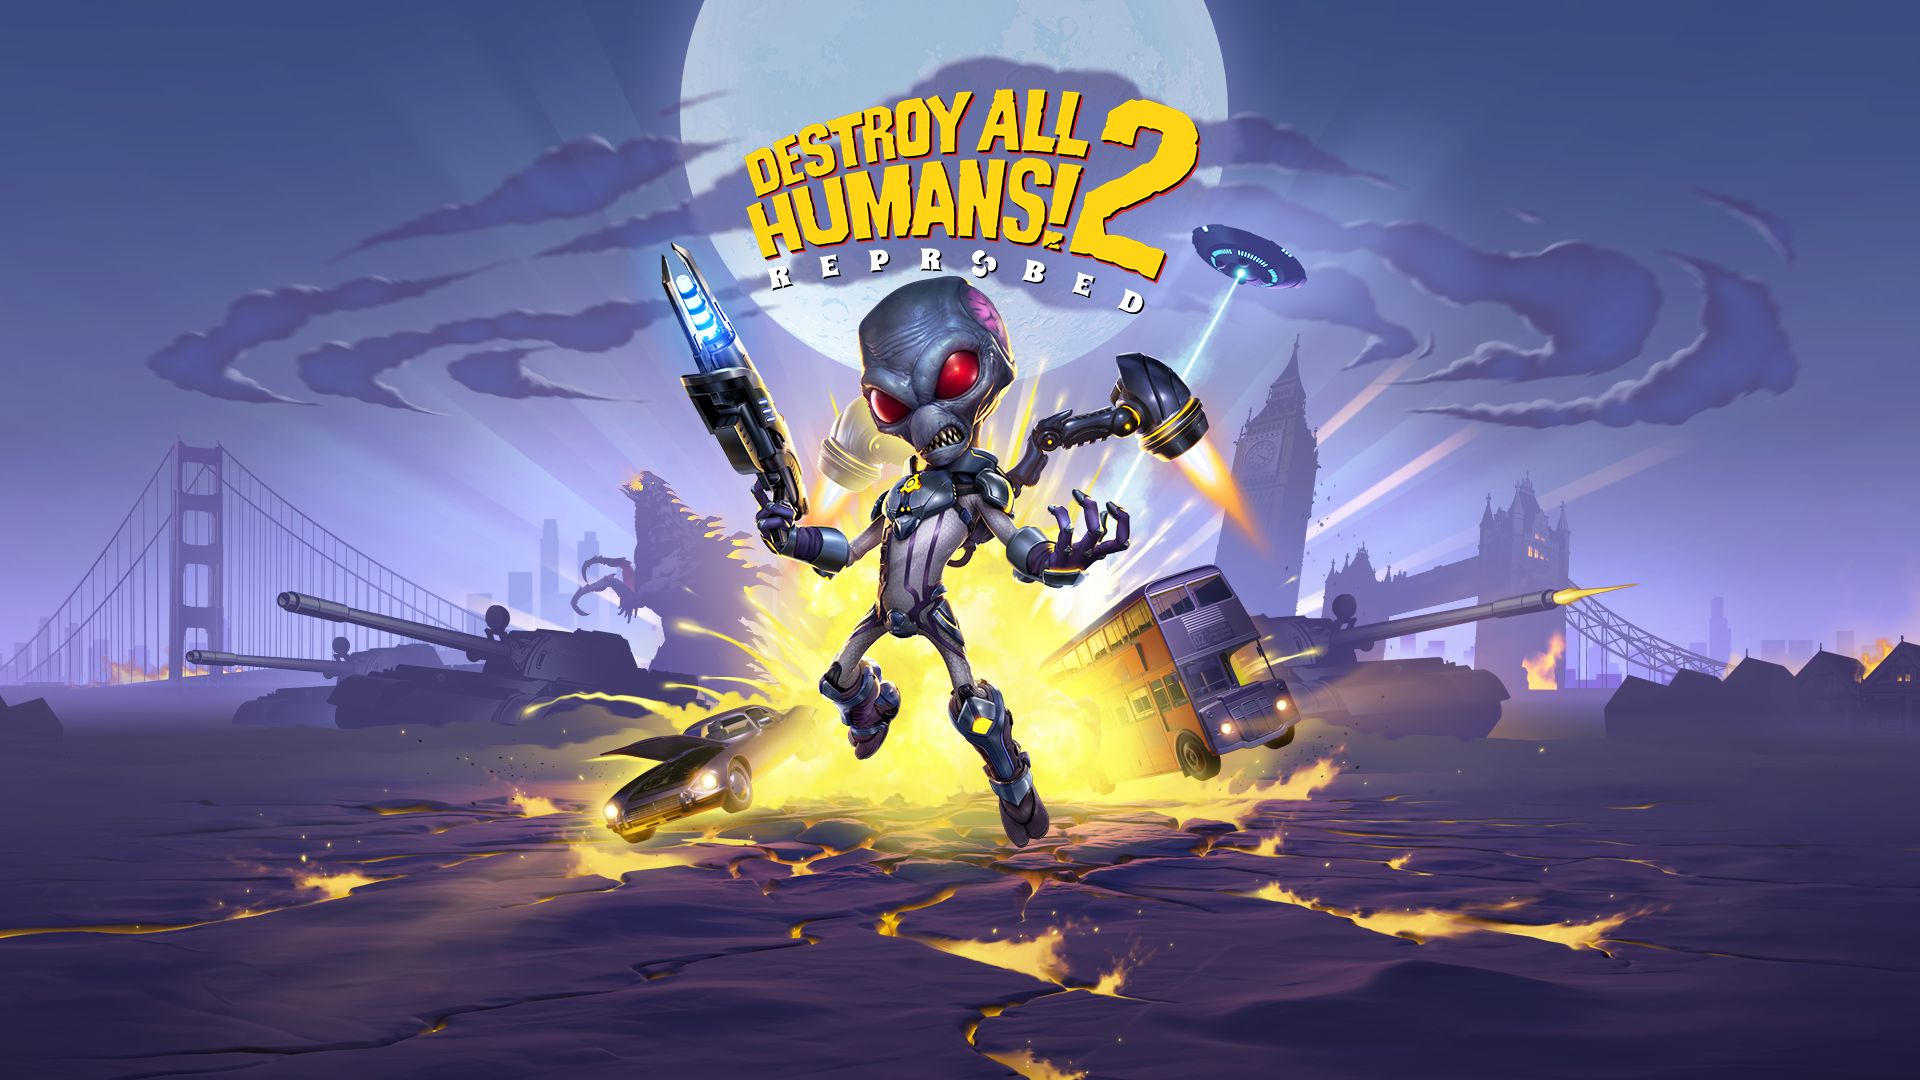 Destroy All Humans 2 - Reprobed